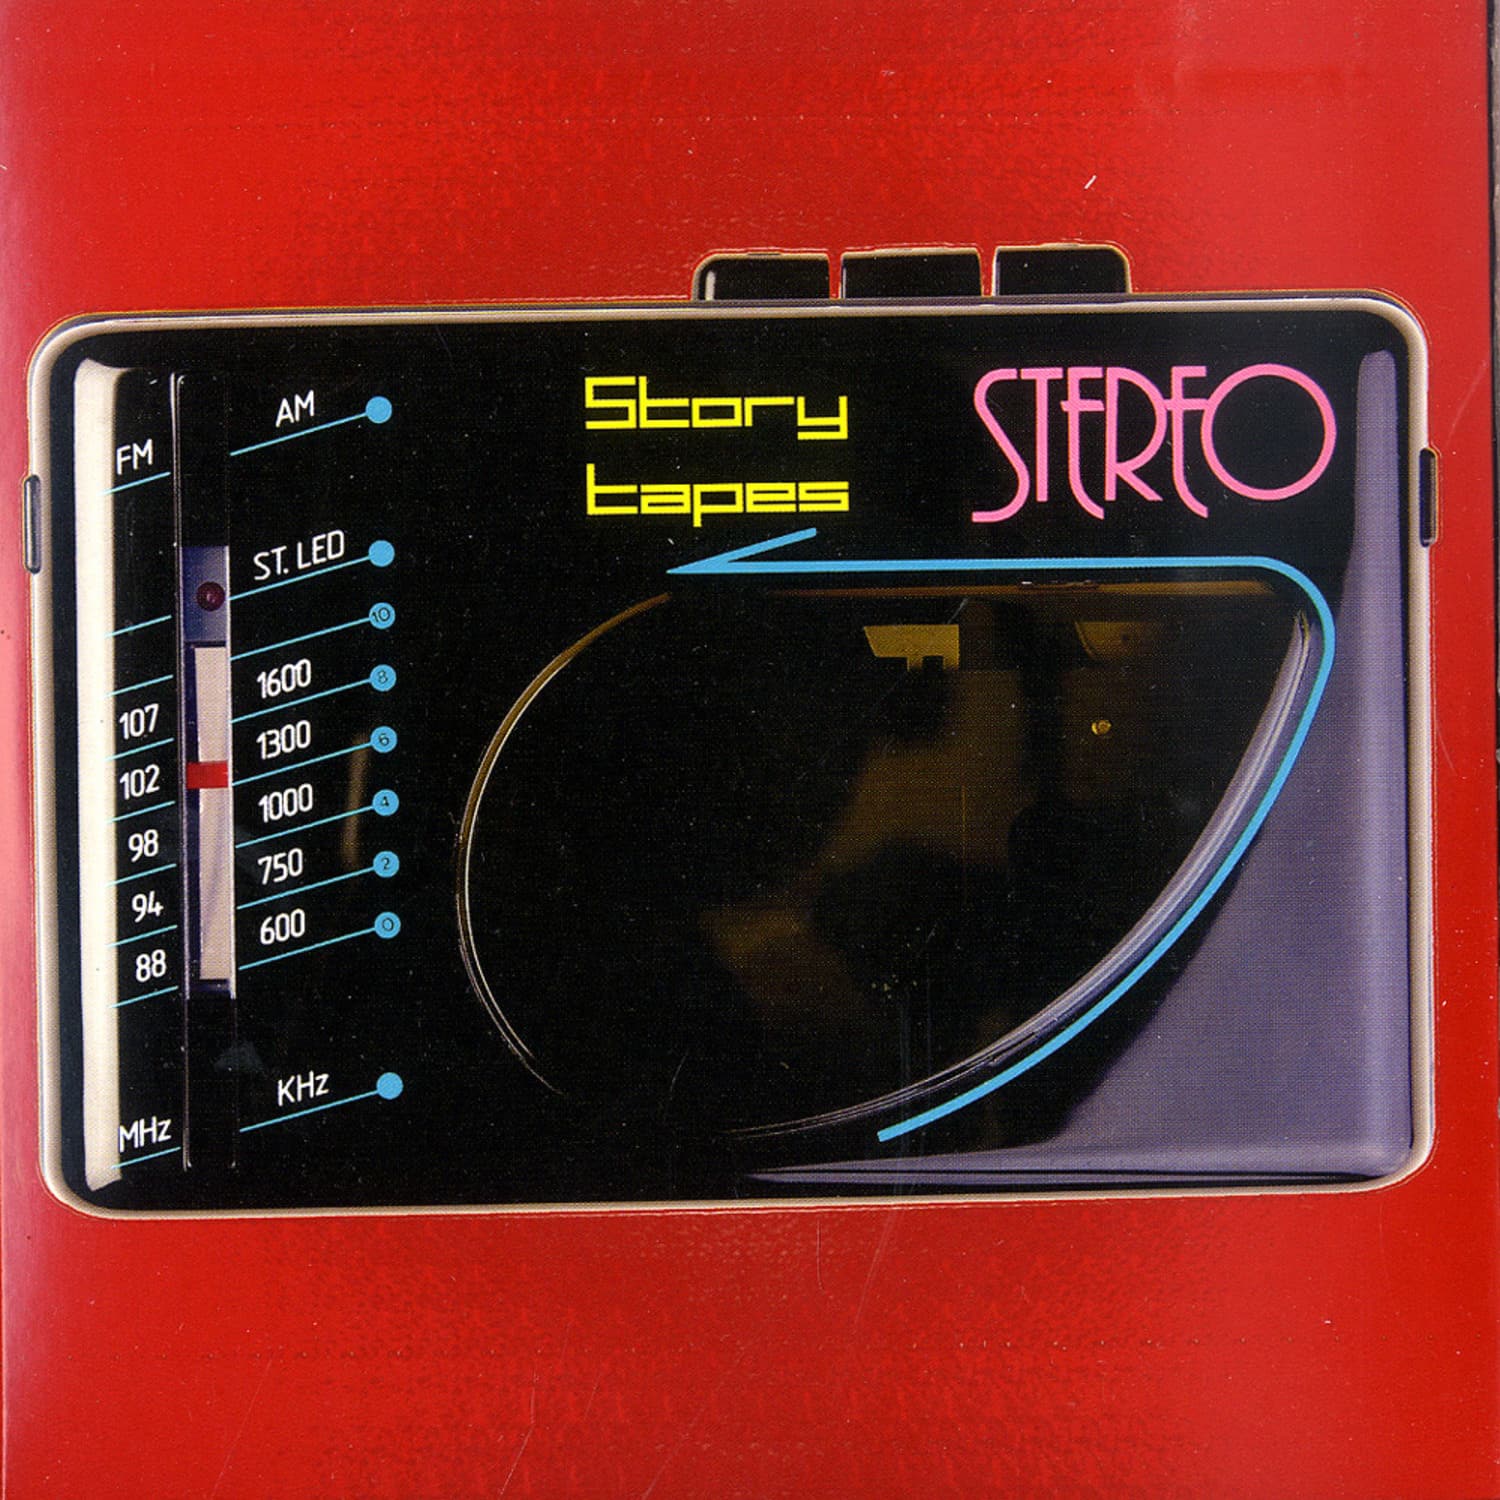 Story Tapes - STEREO 